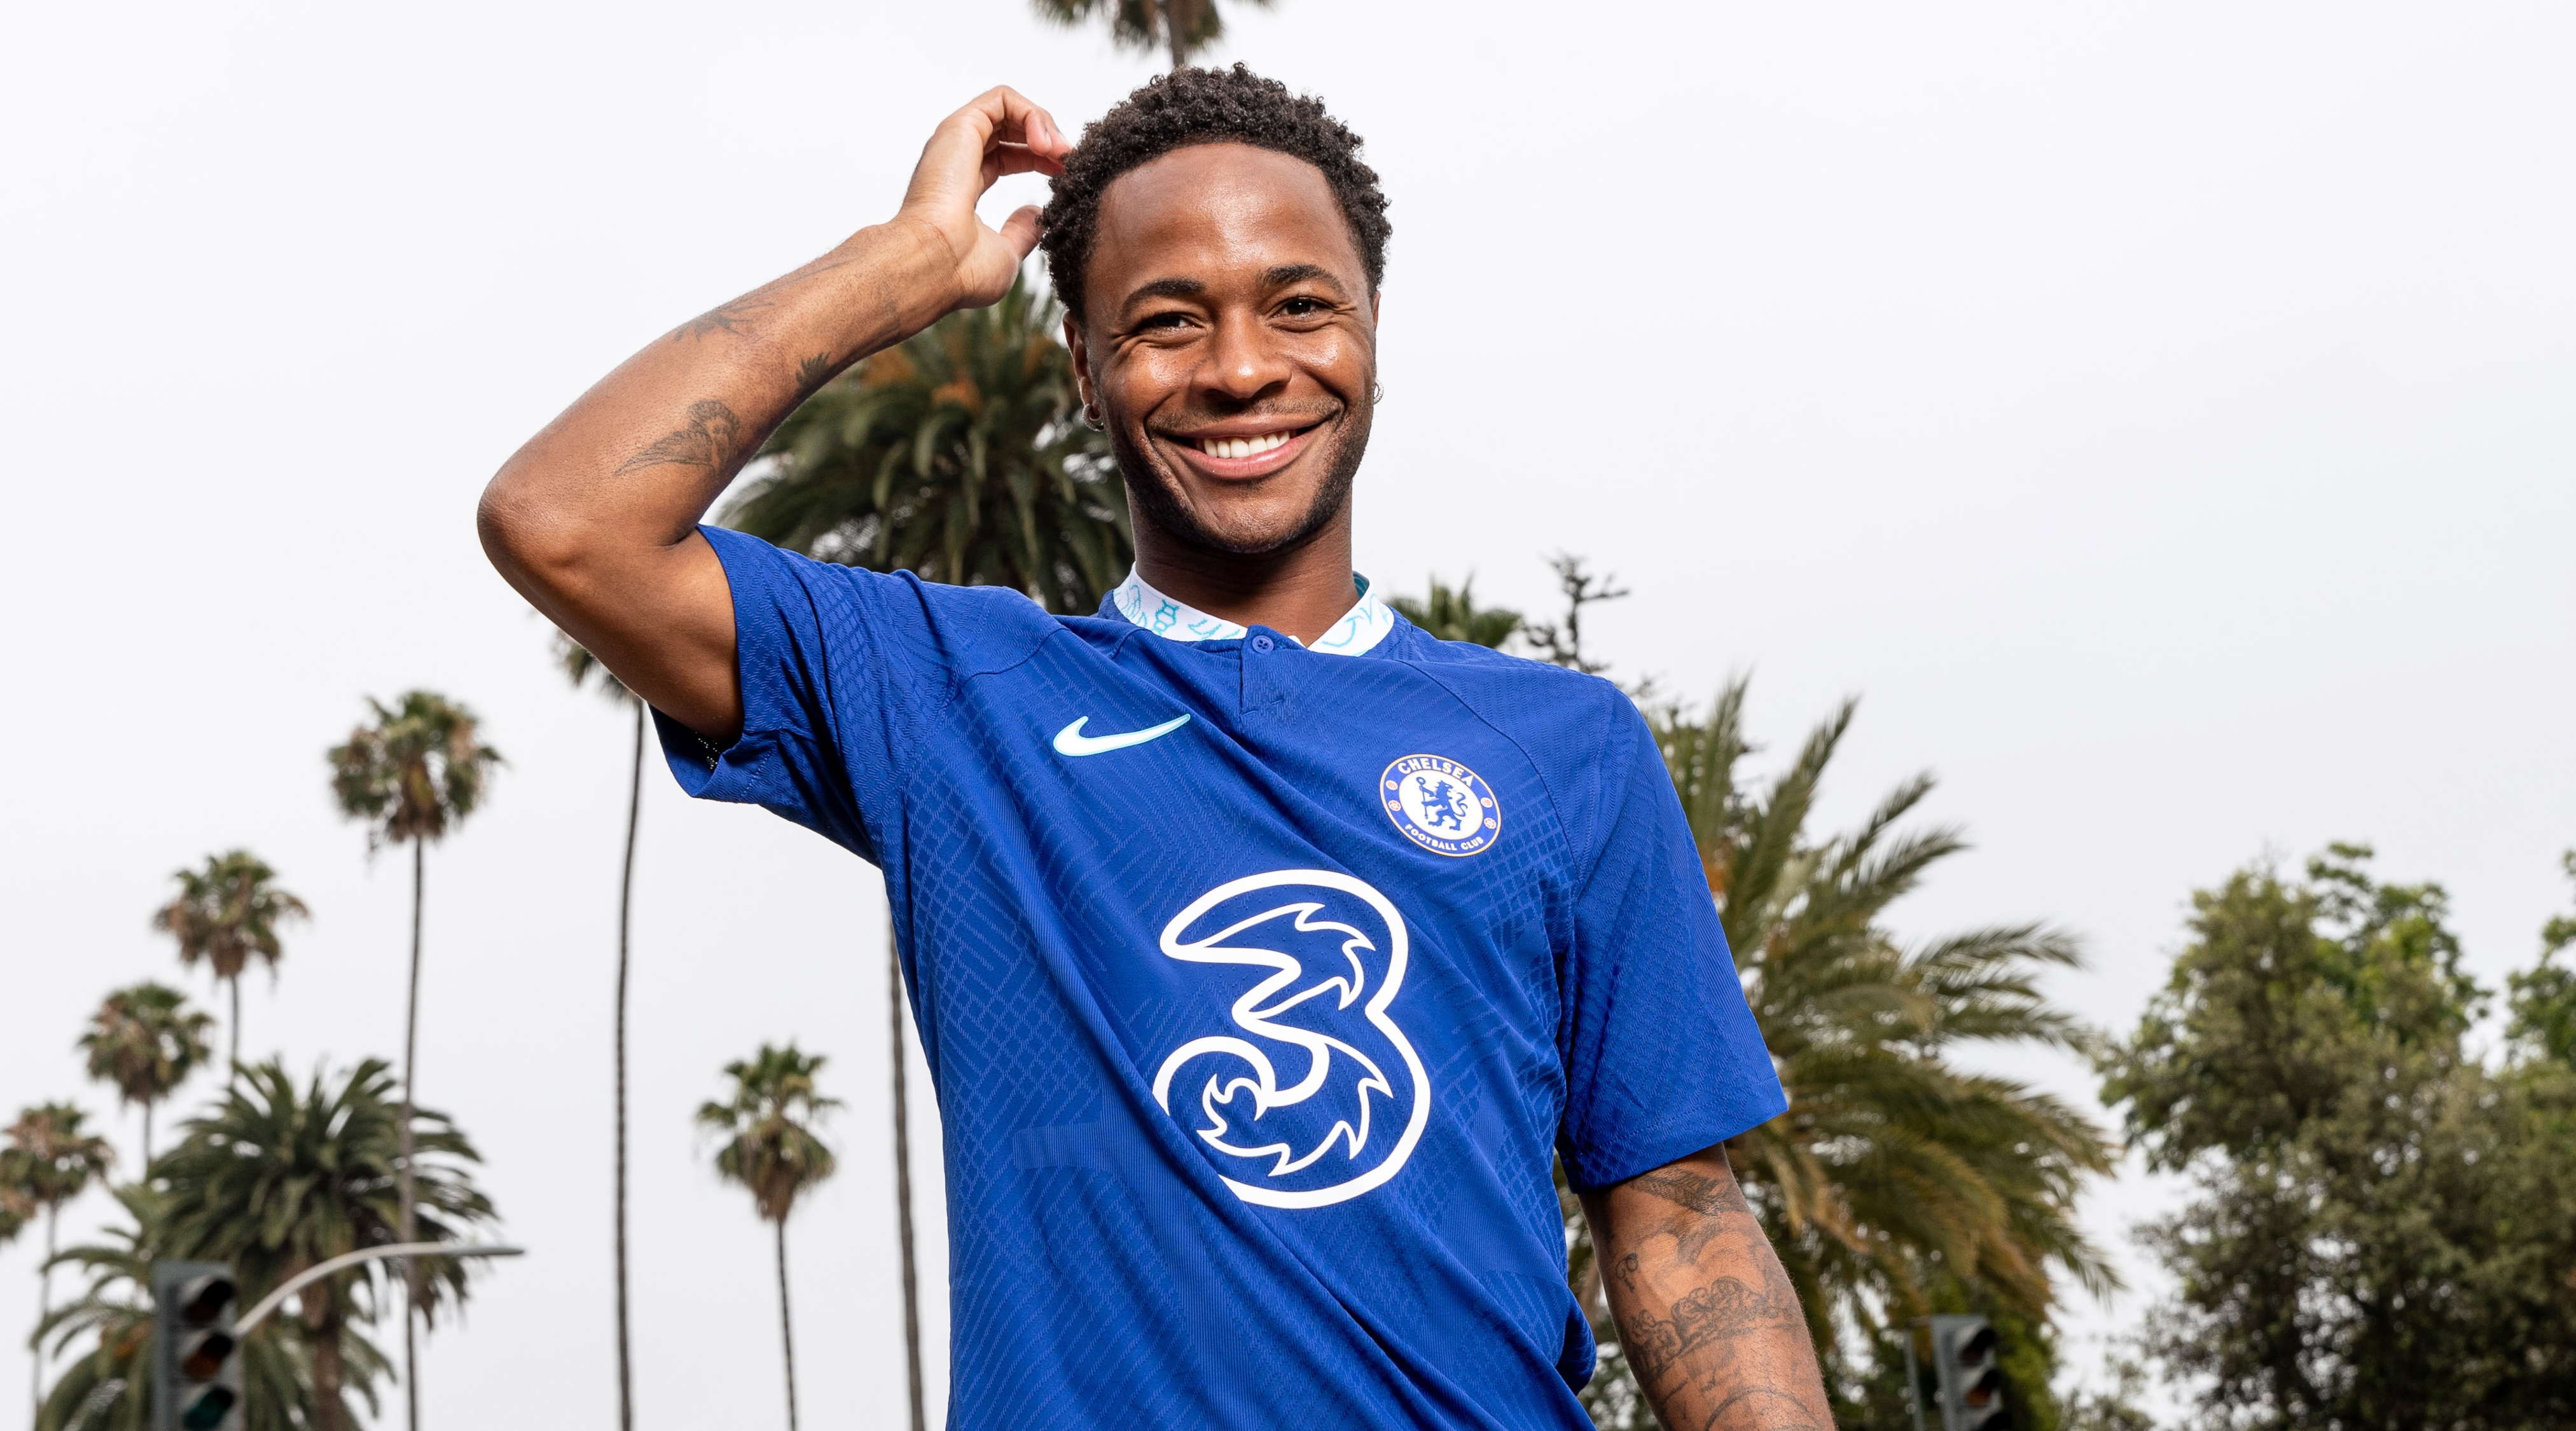 Everton vs Chelsea Live |  Chelsea's new signing Raheem Sterling is pictured around Beverley Hills on July 13, 2022 in Los Angeles, California.